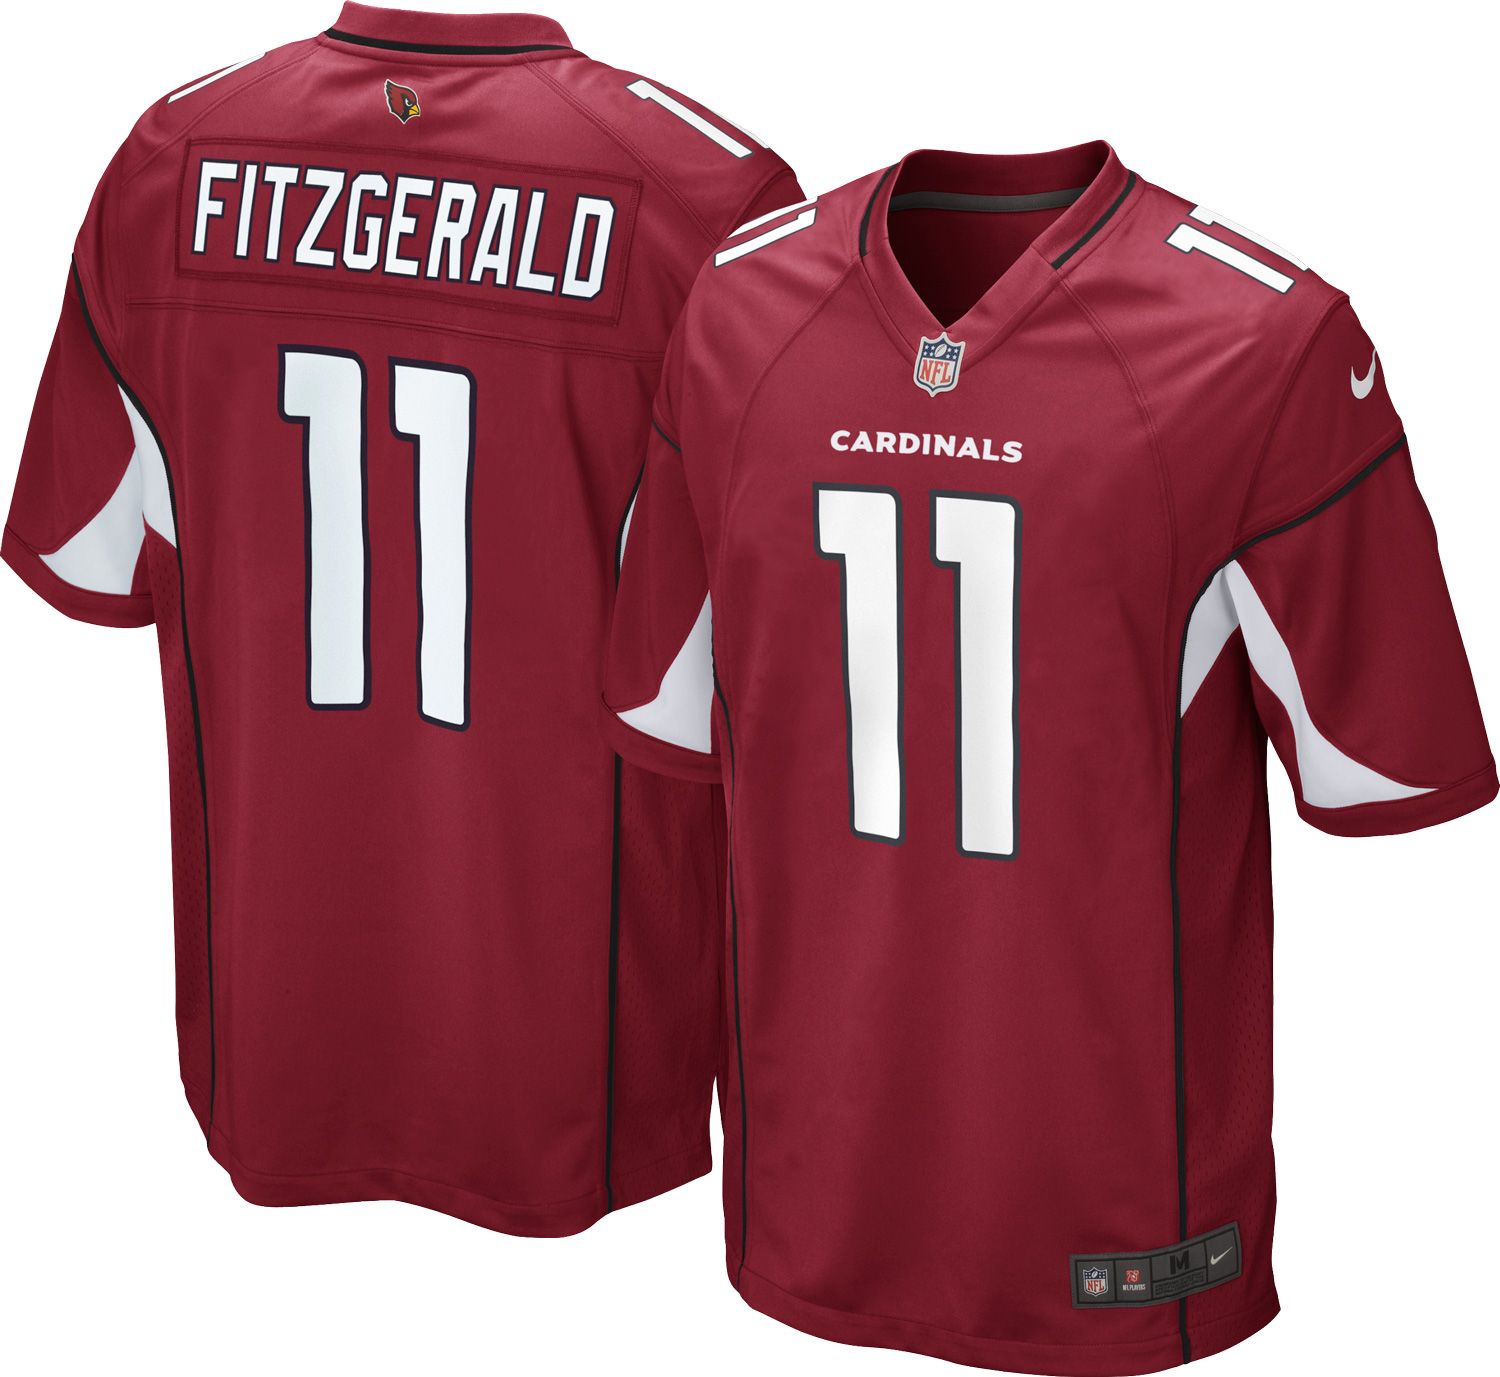 larry fitzgerald jersey number